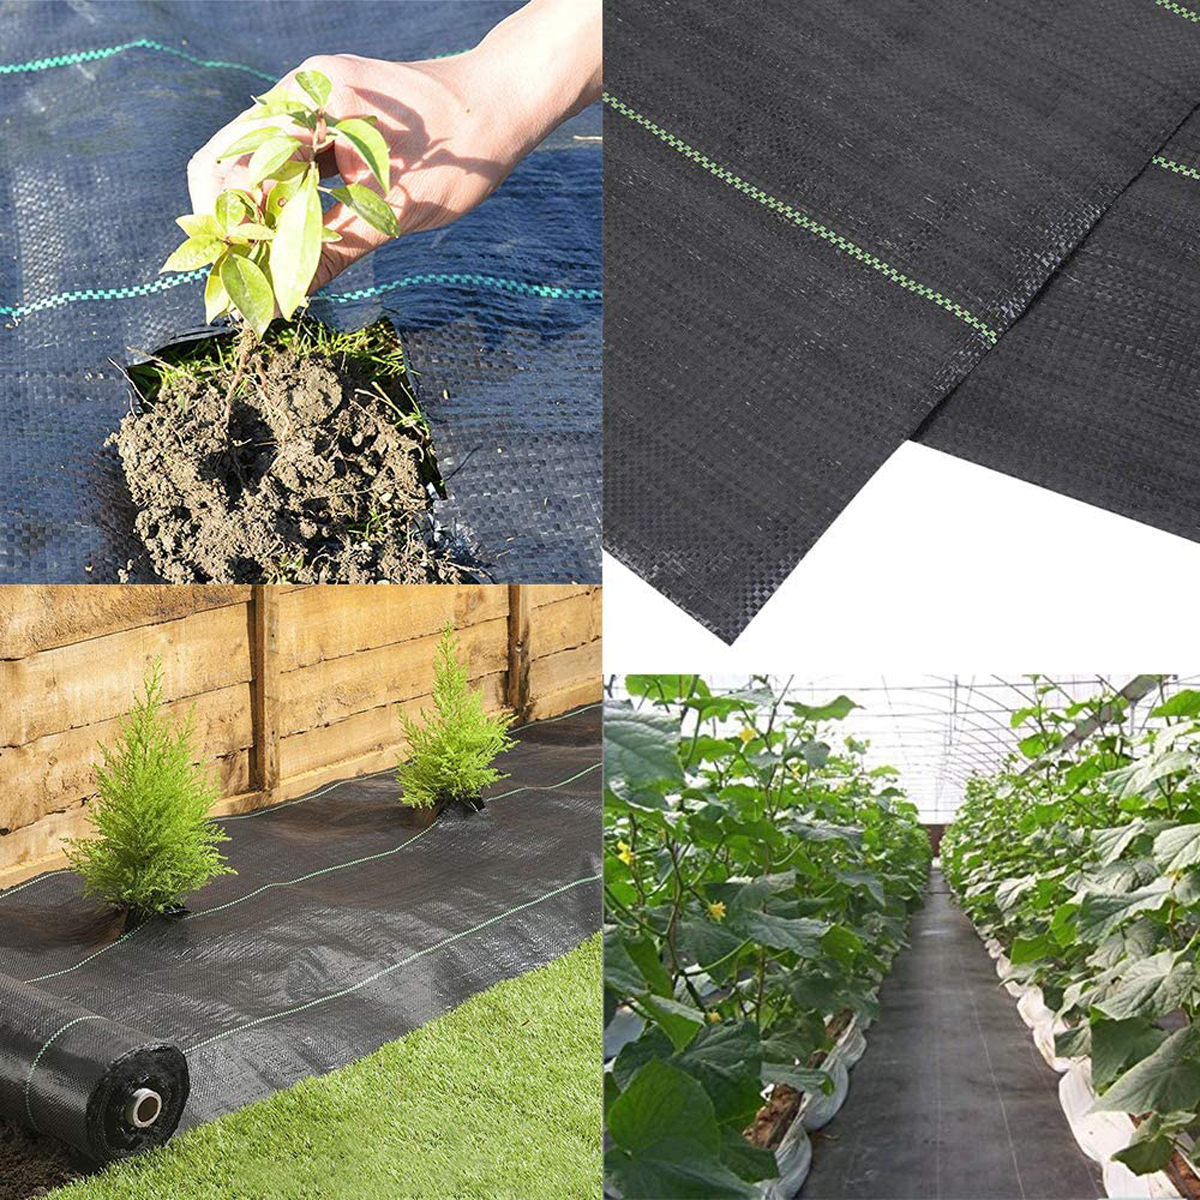 121524m-Wide-70gsm-Weed-Control-Fabric-Ground-Cover-Membrane-Garden-Landscape-1831388-8